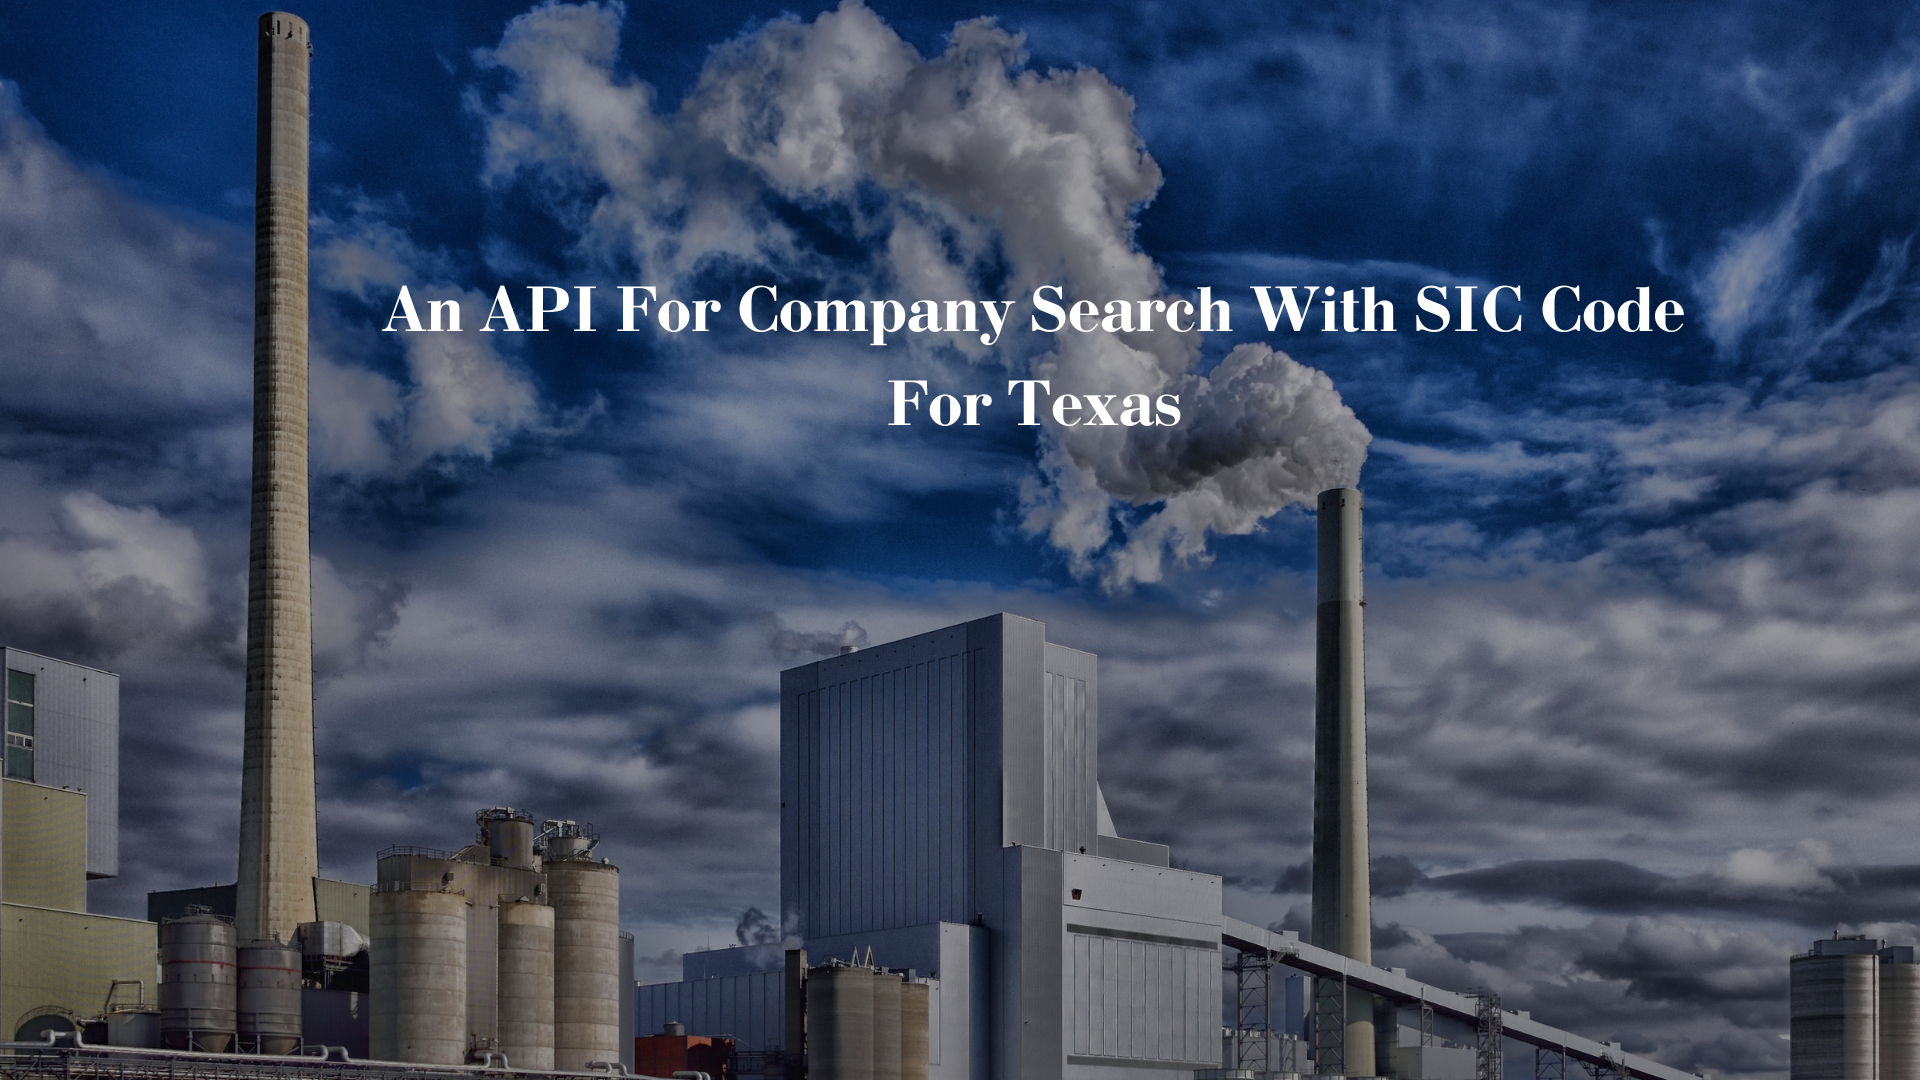 An API For Company Search With SIC Code For Texas